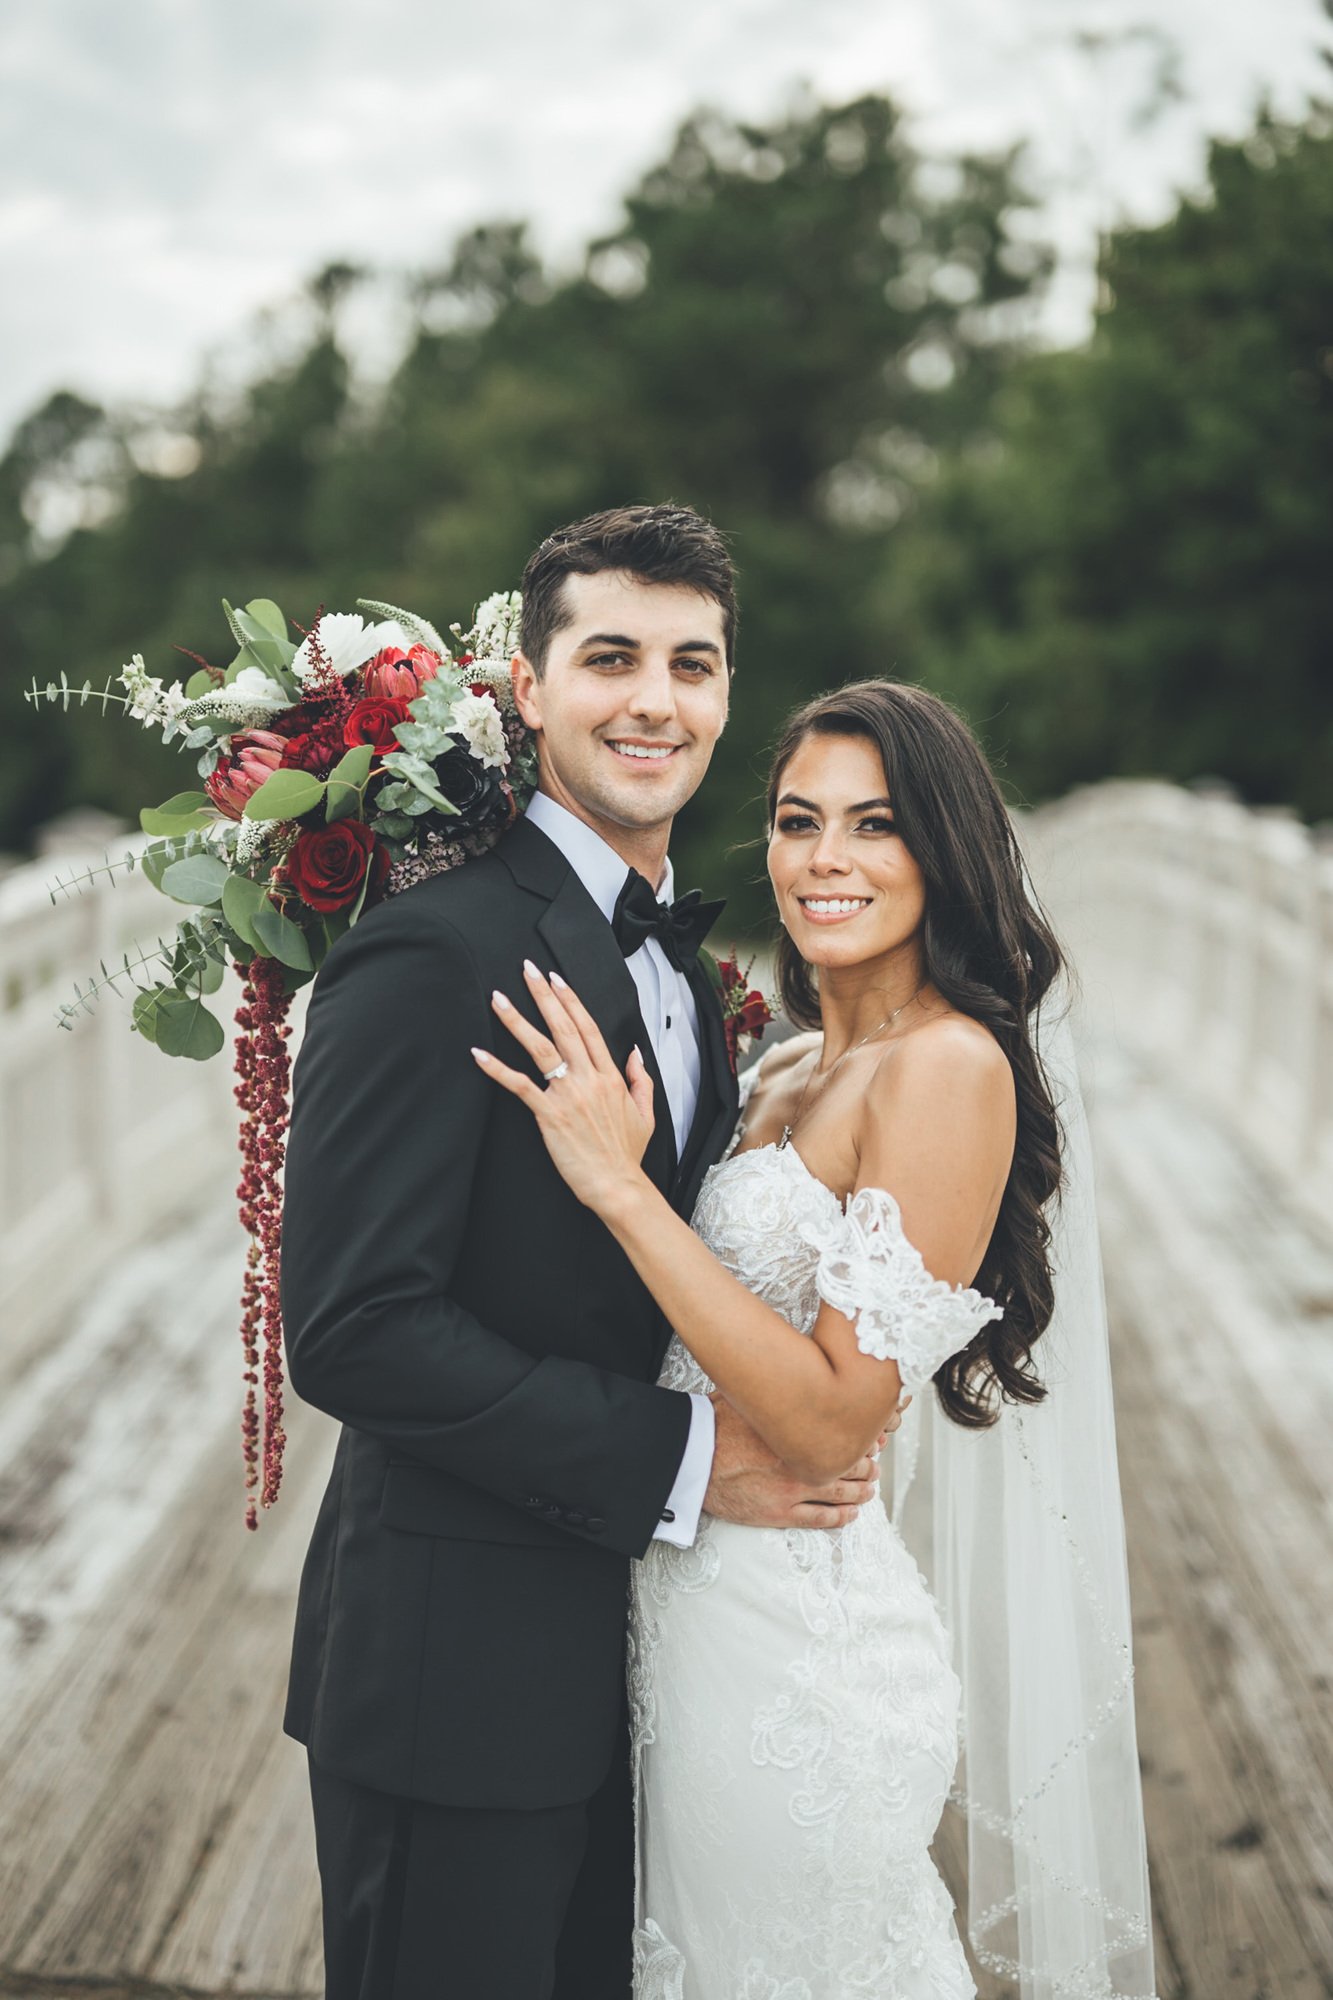 Bow Tie Photo & Video couple during bridal portraits after wedding ceremony but before wedding reception in St. Augustine, FL.jpg